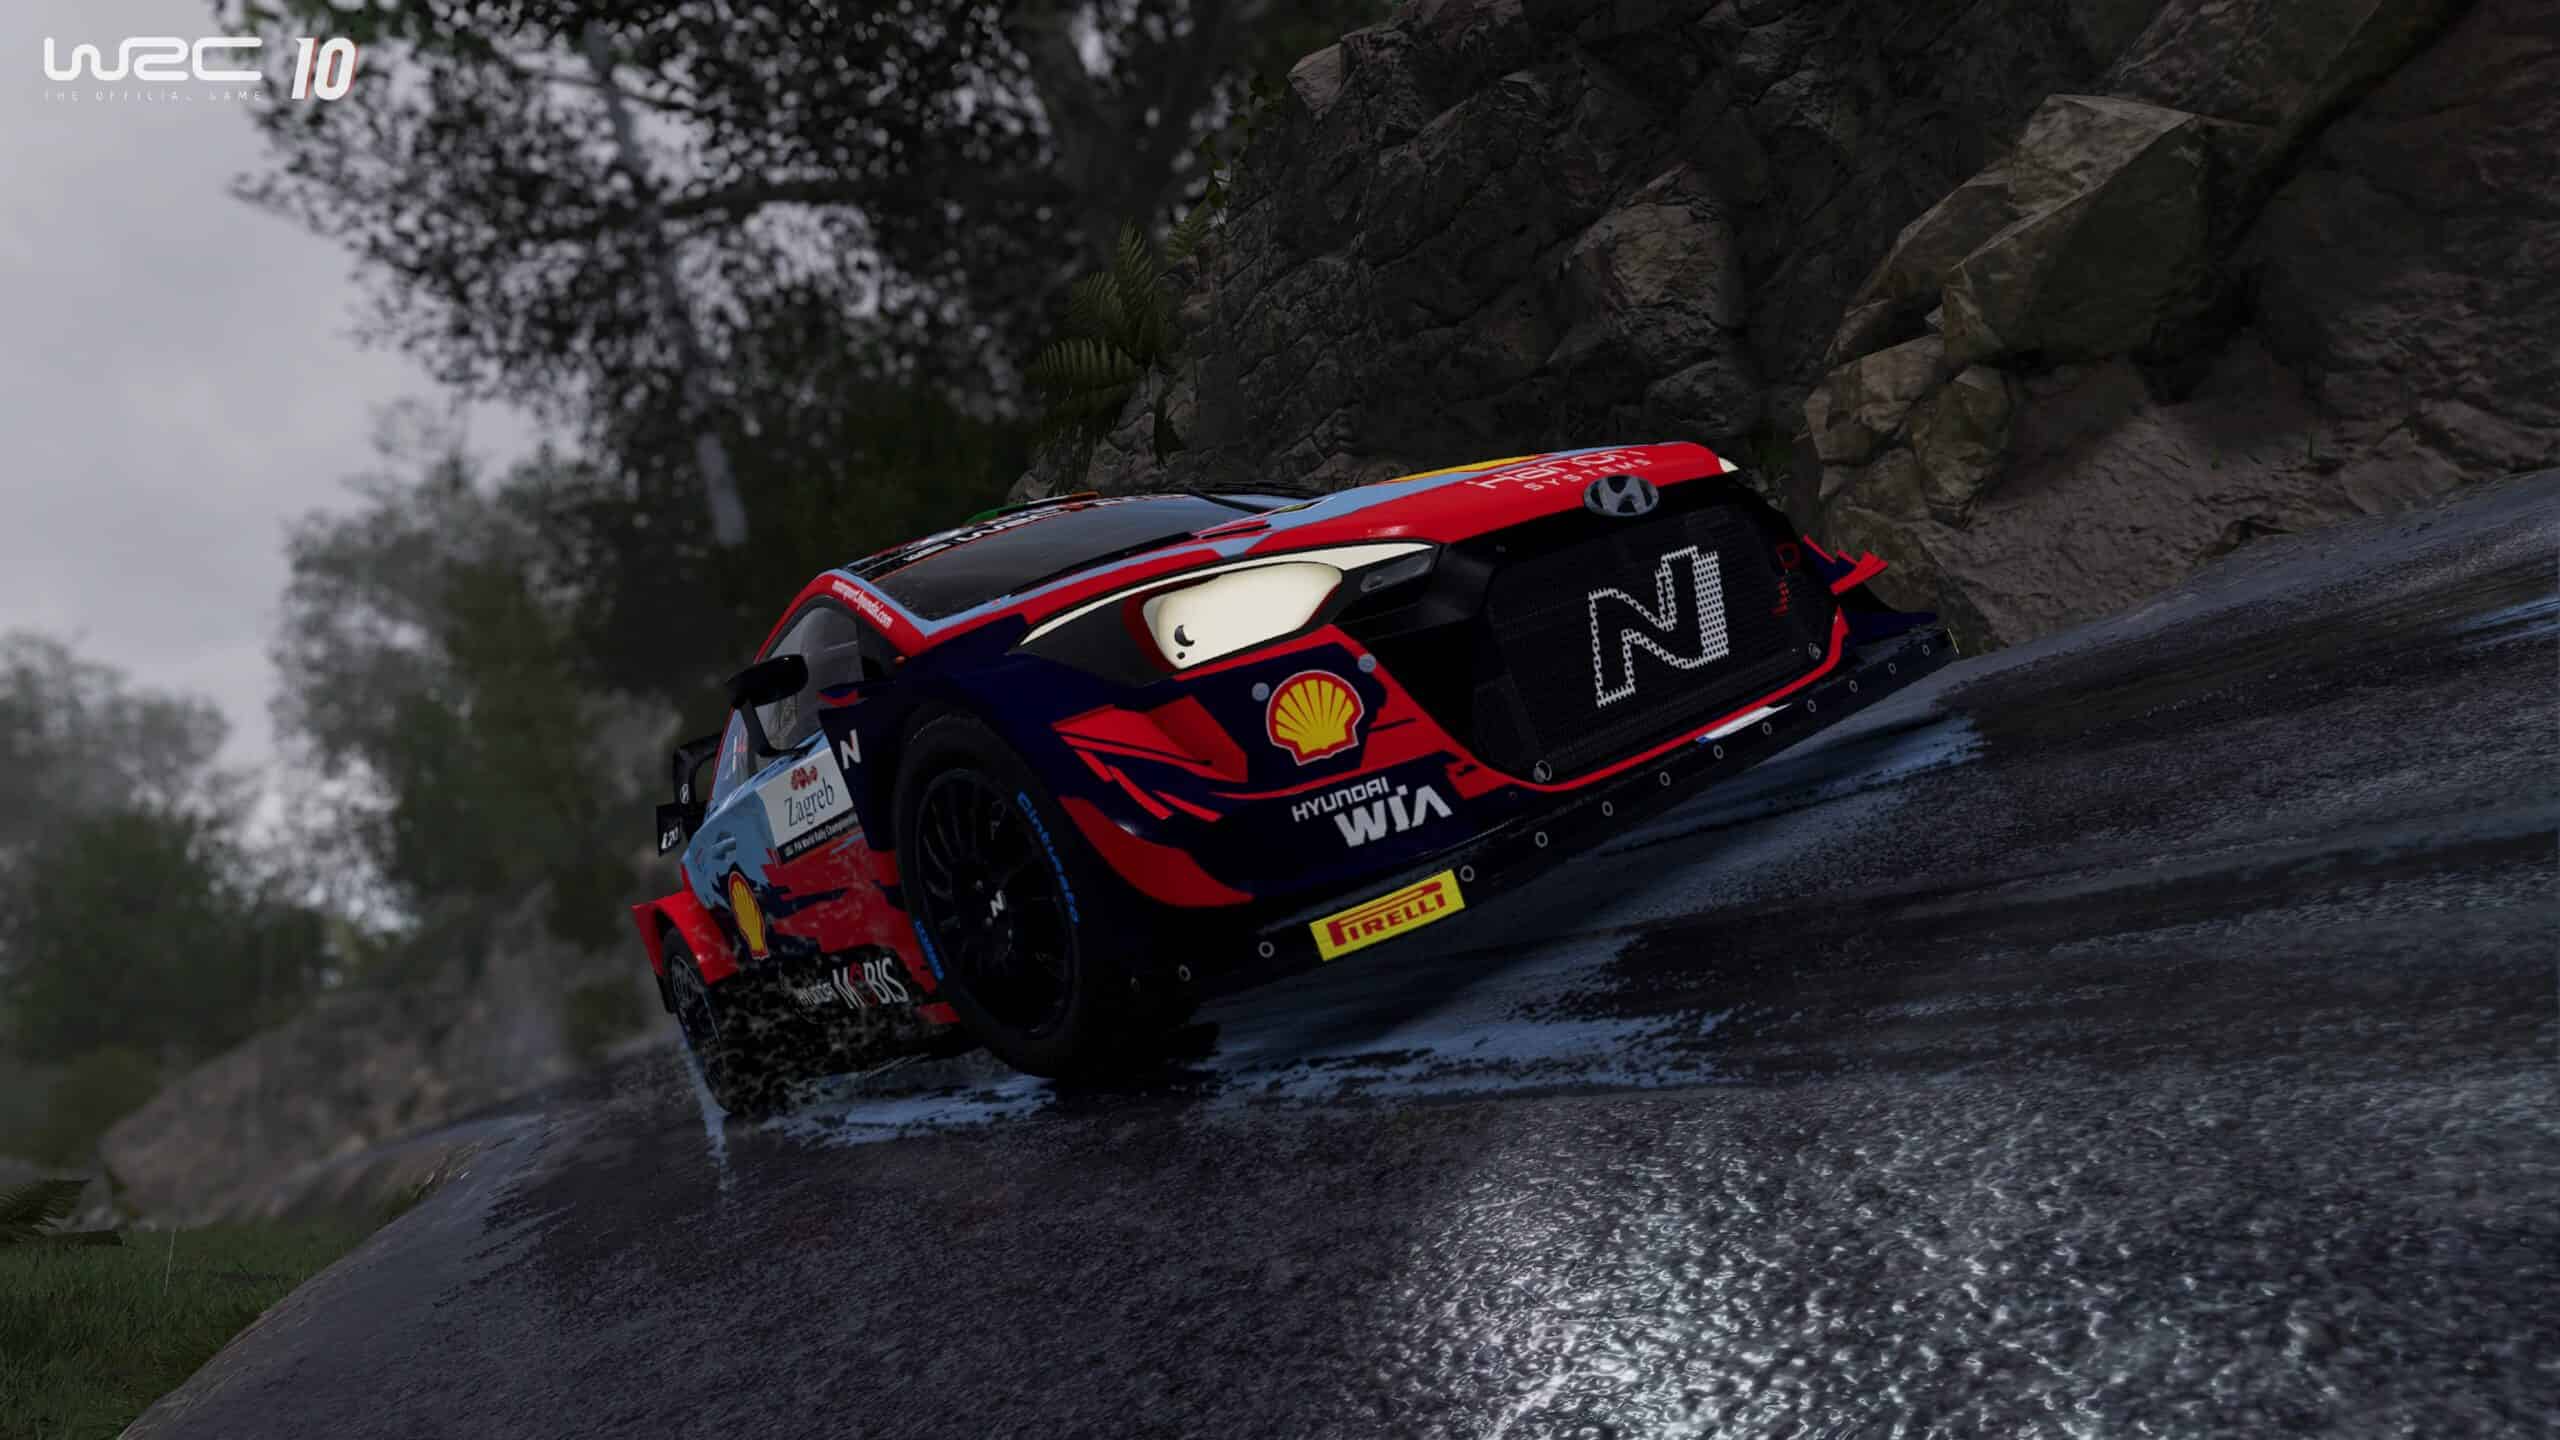 New online features, stages and vehicles will be added to WRC 10